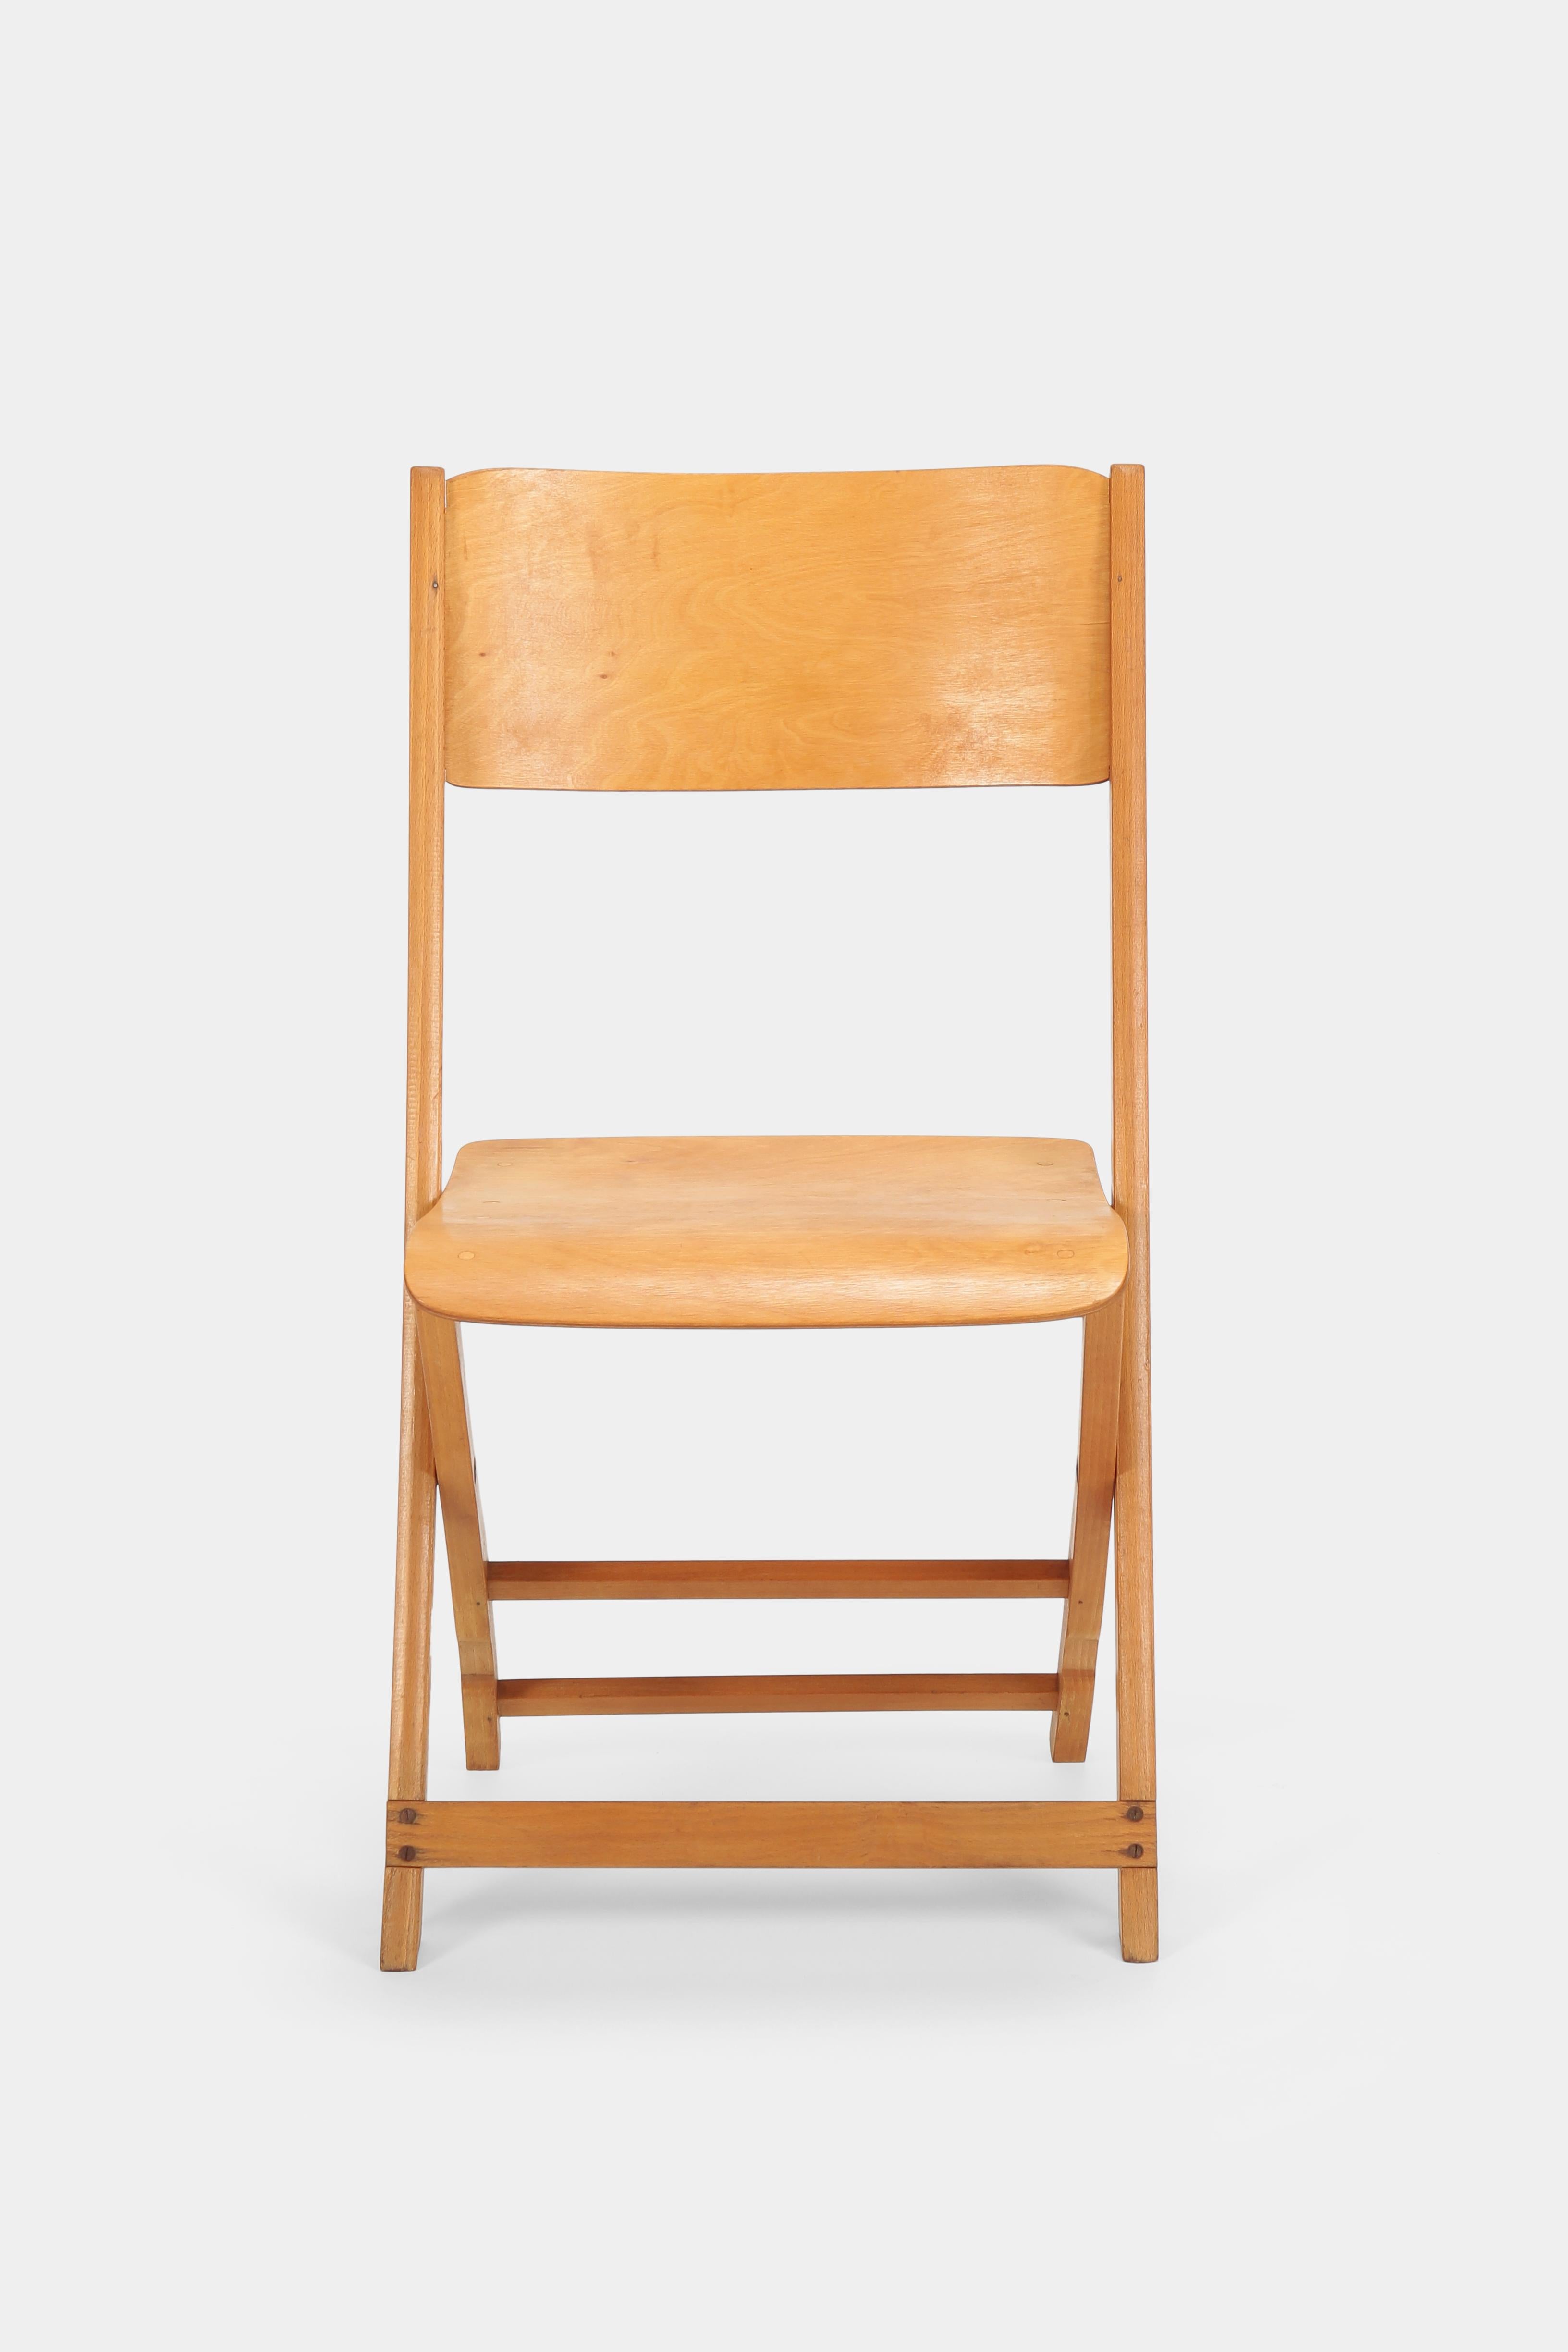 Swiss Midcentury Modern Birchwood Folding Chair, Wohnbedarf 1940s, Light Brown In Good Condition For Sale In Basel, CH